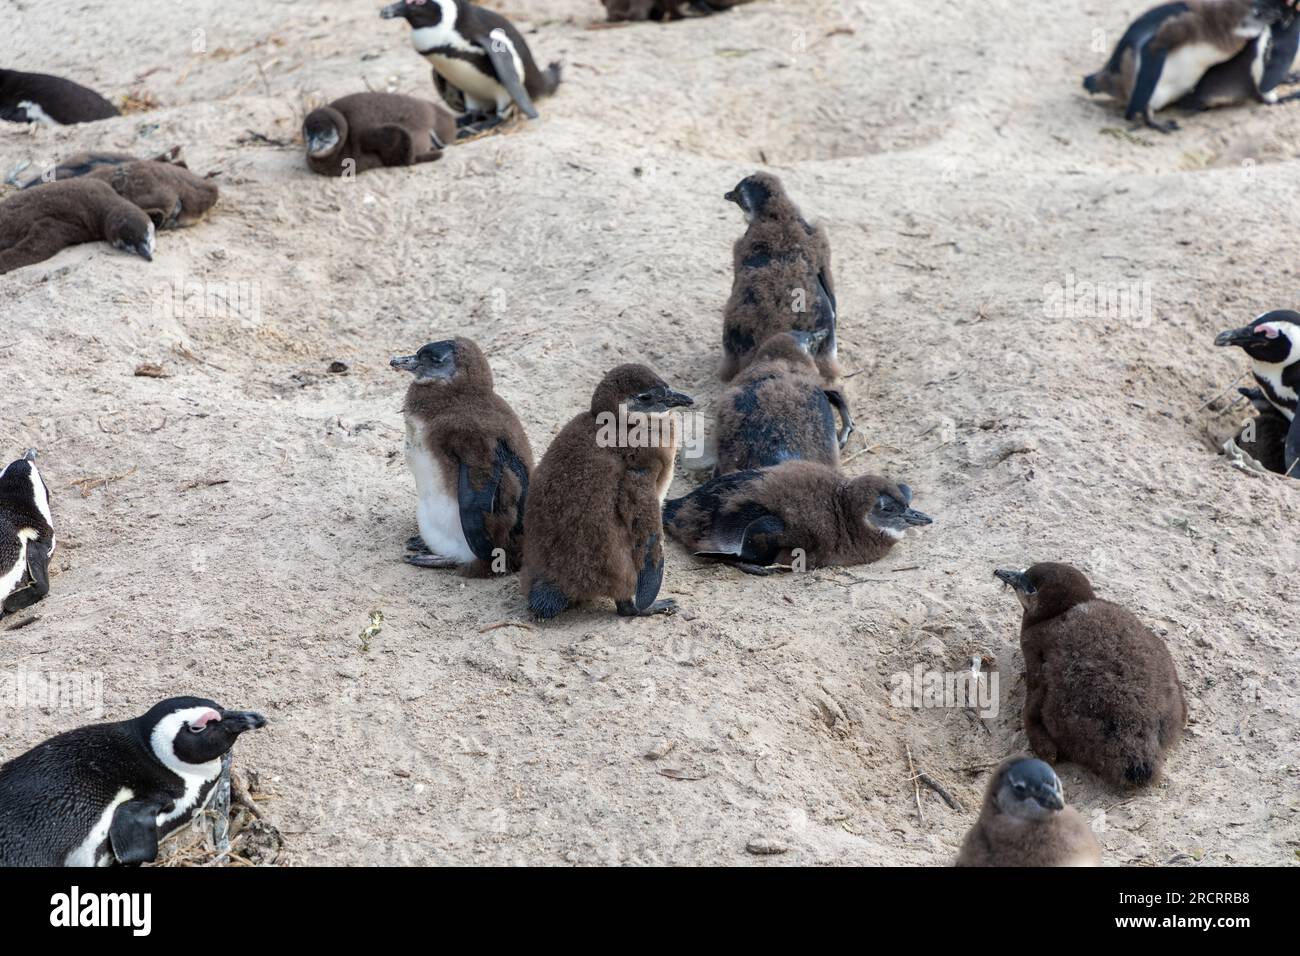 A group of Penguin nestlings around their nesting site on a beach in South Africa. Stock Photo